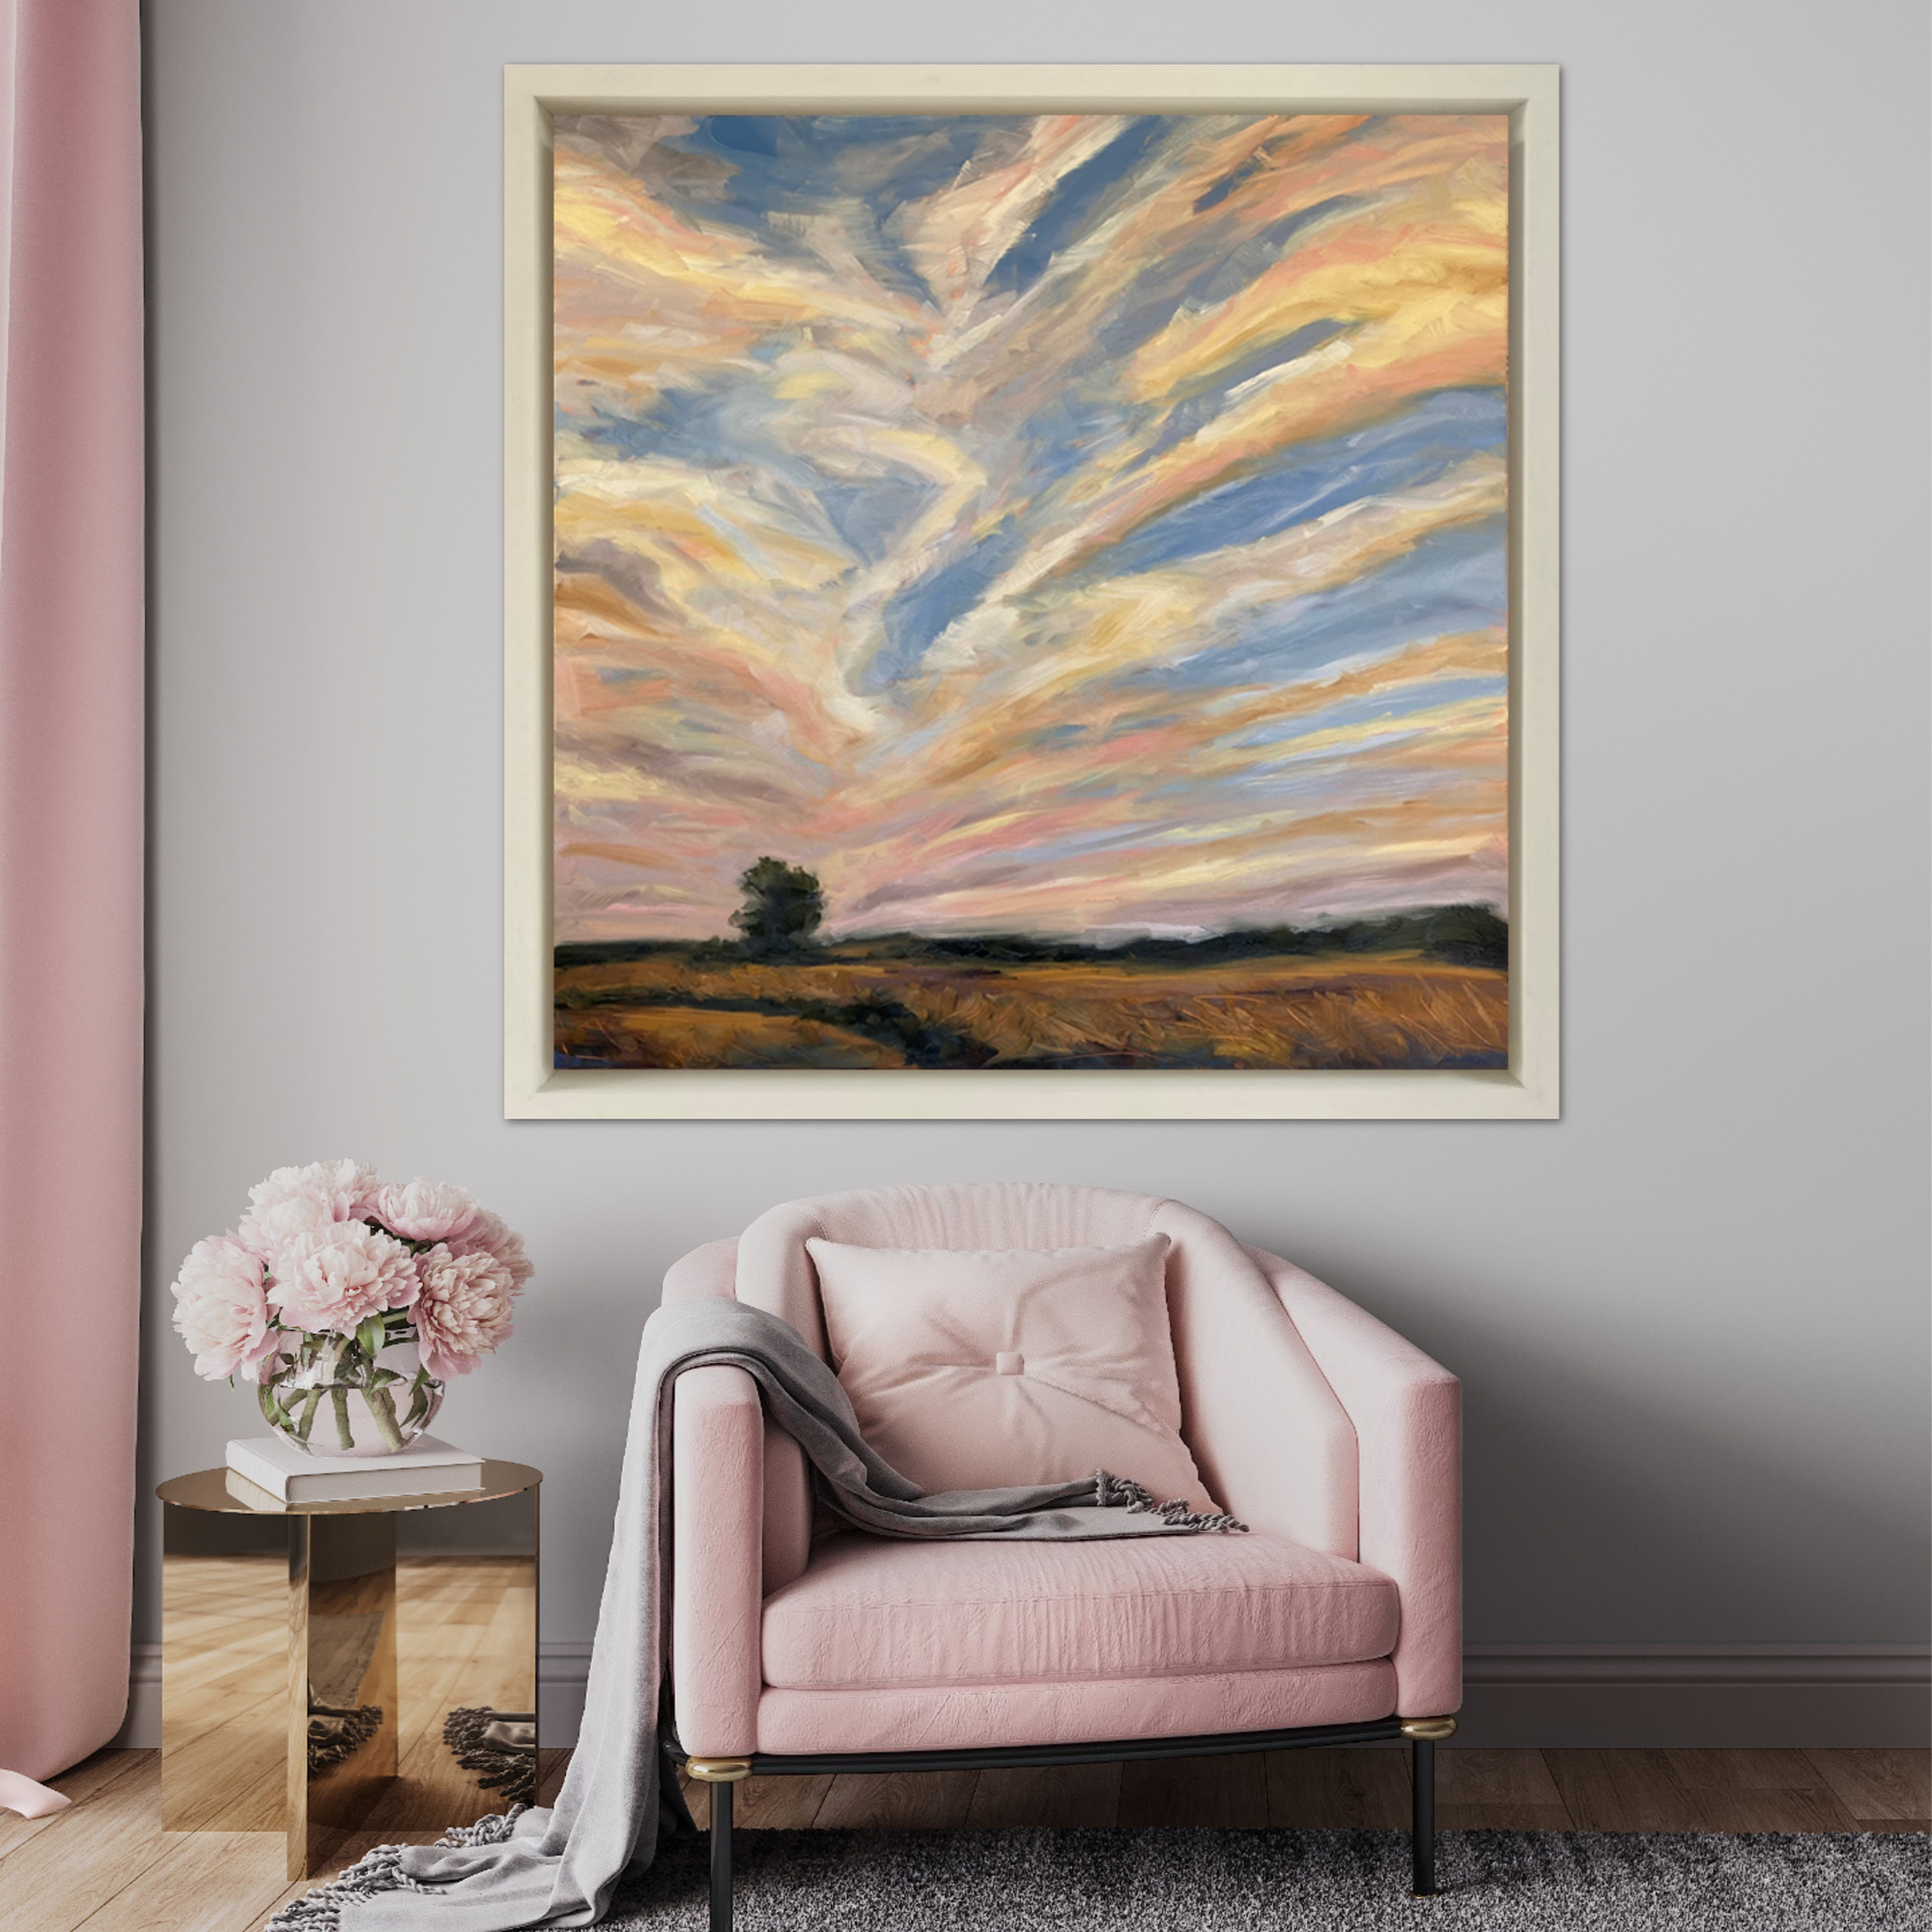 Dreaming Original Oil Landscape Painting In Room Setting 3